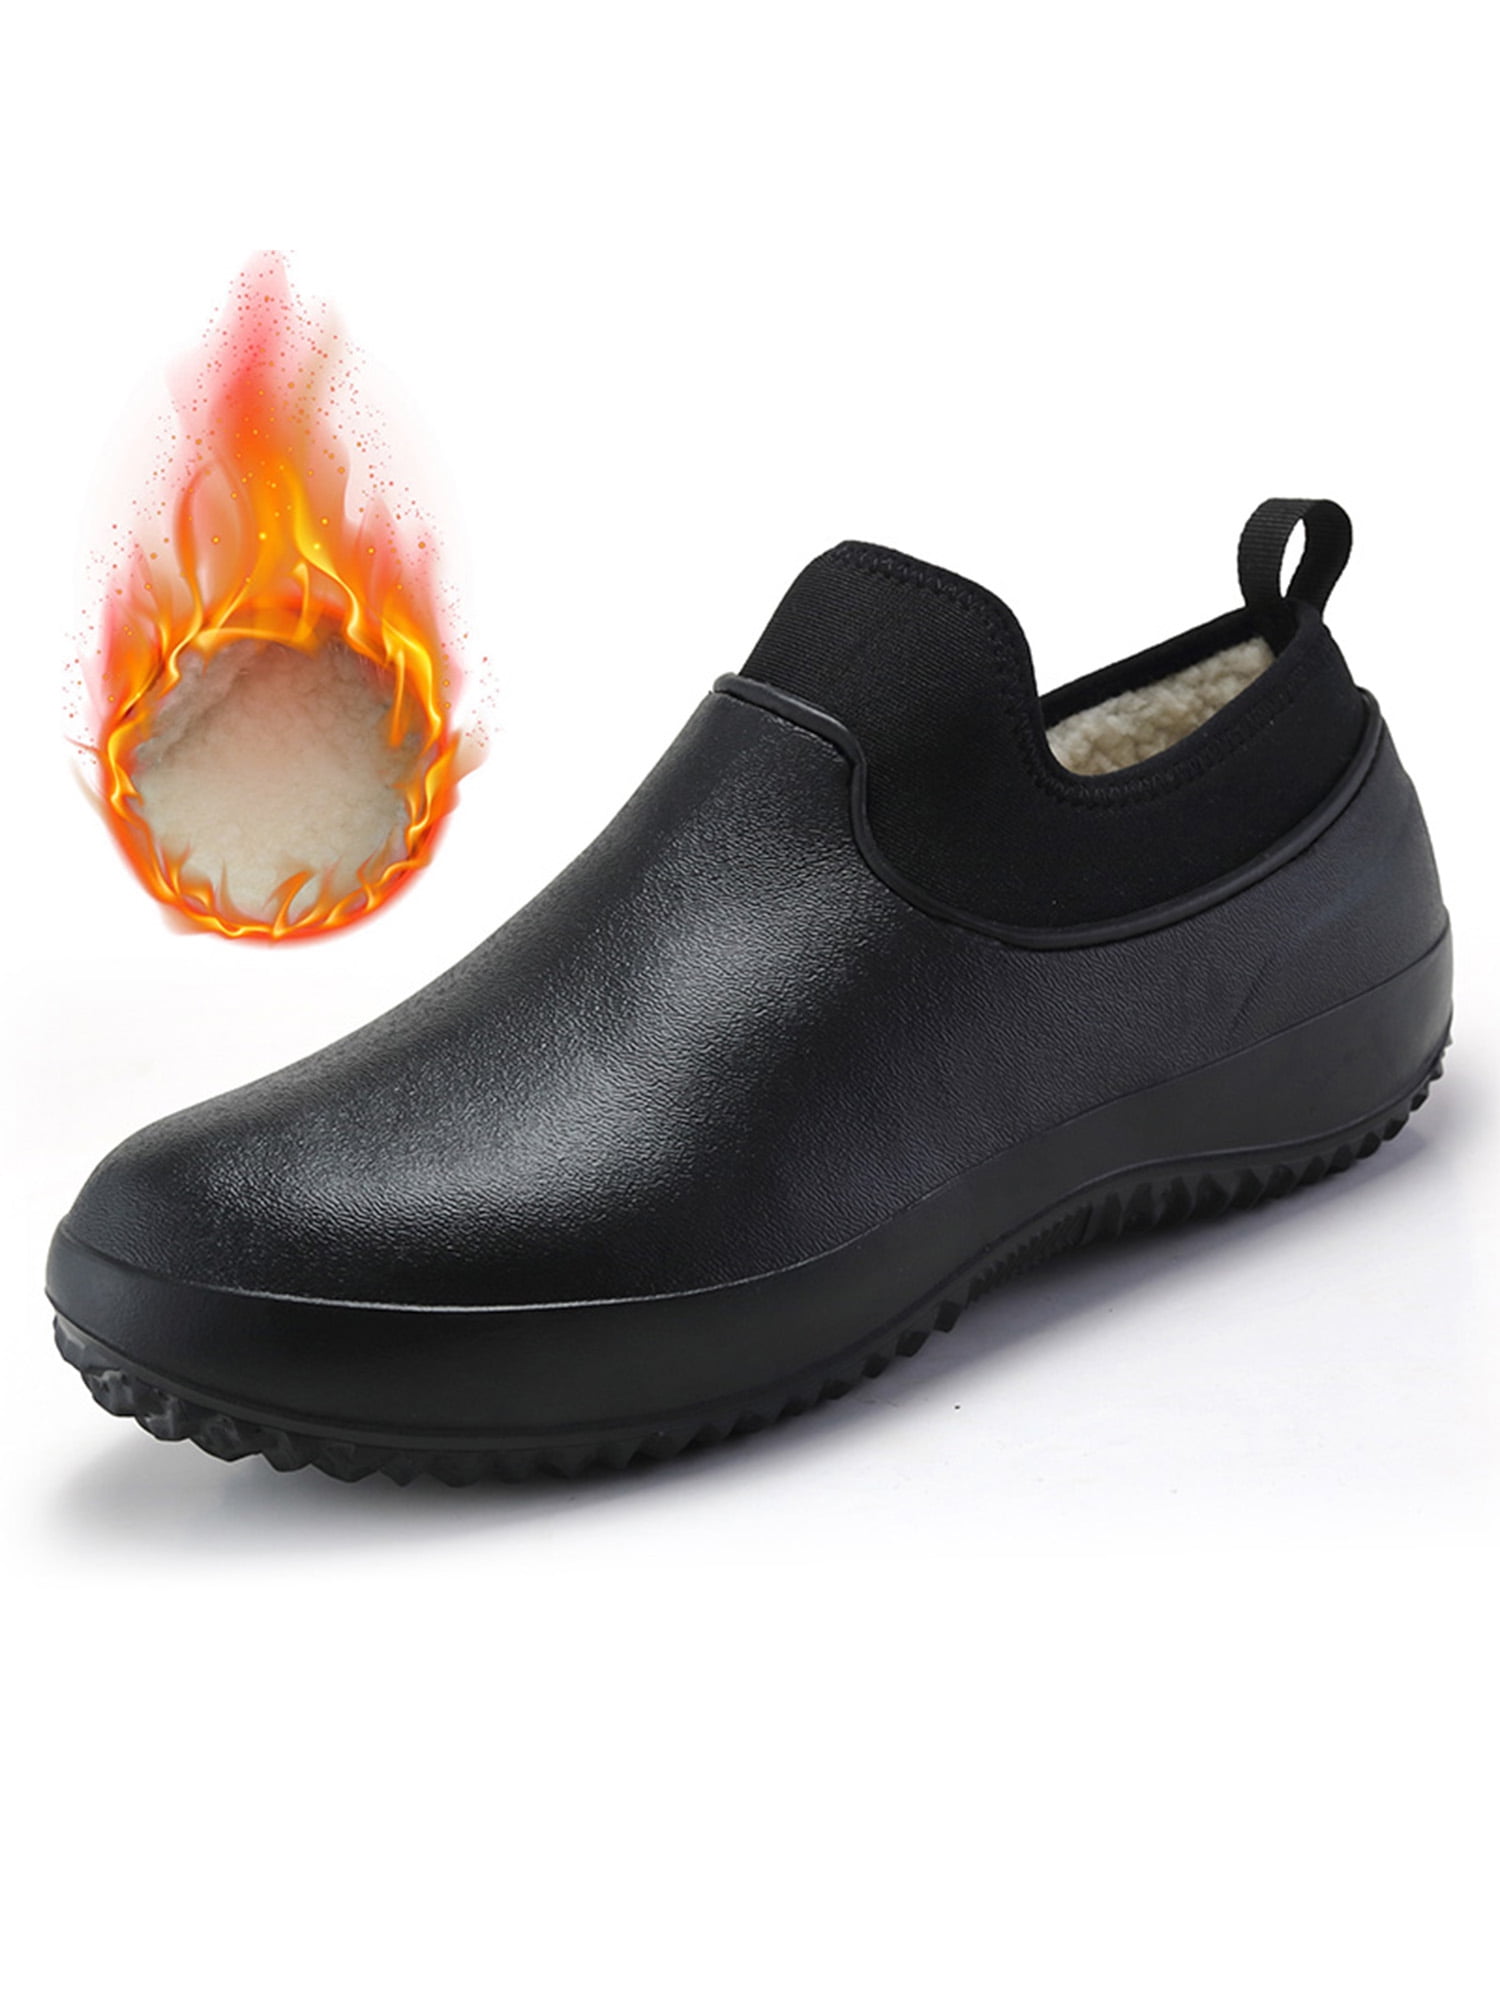 Nurse Garden Work Shoes for Men and Women YUNG Slip Resistant Clogs for Professionals Chef Restaurant 